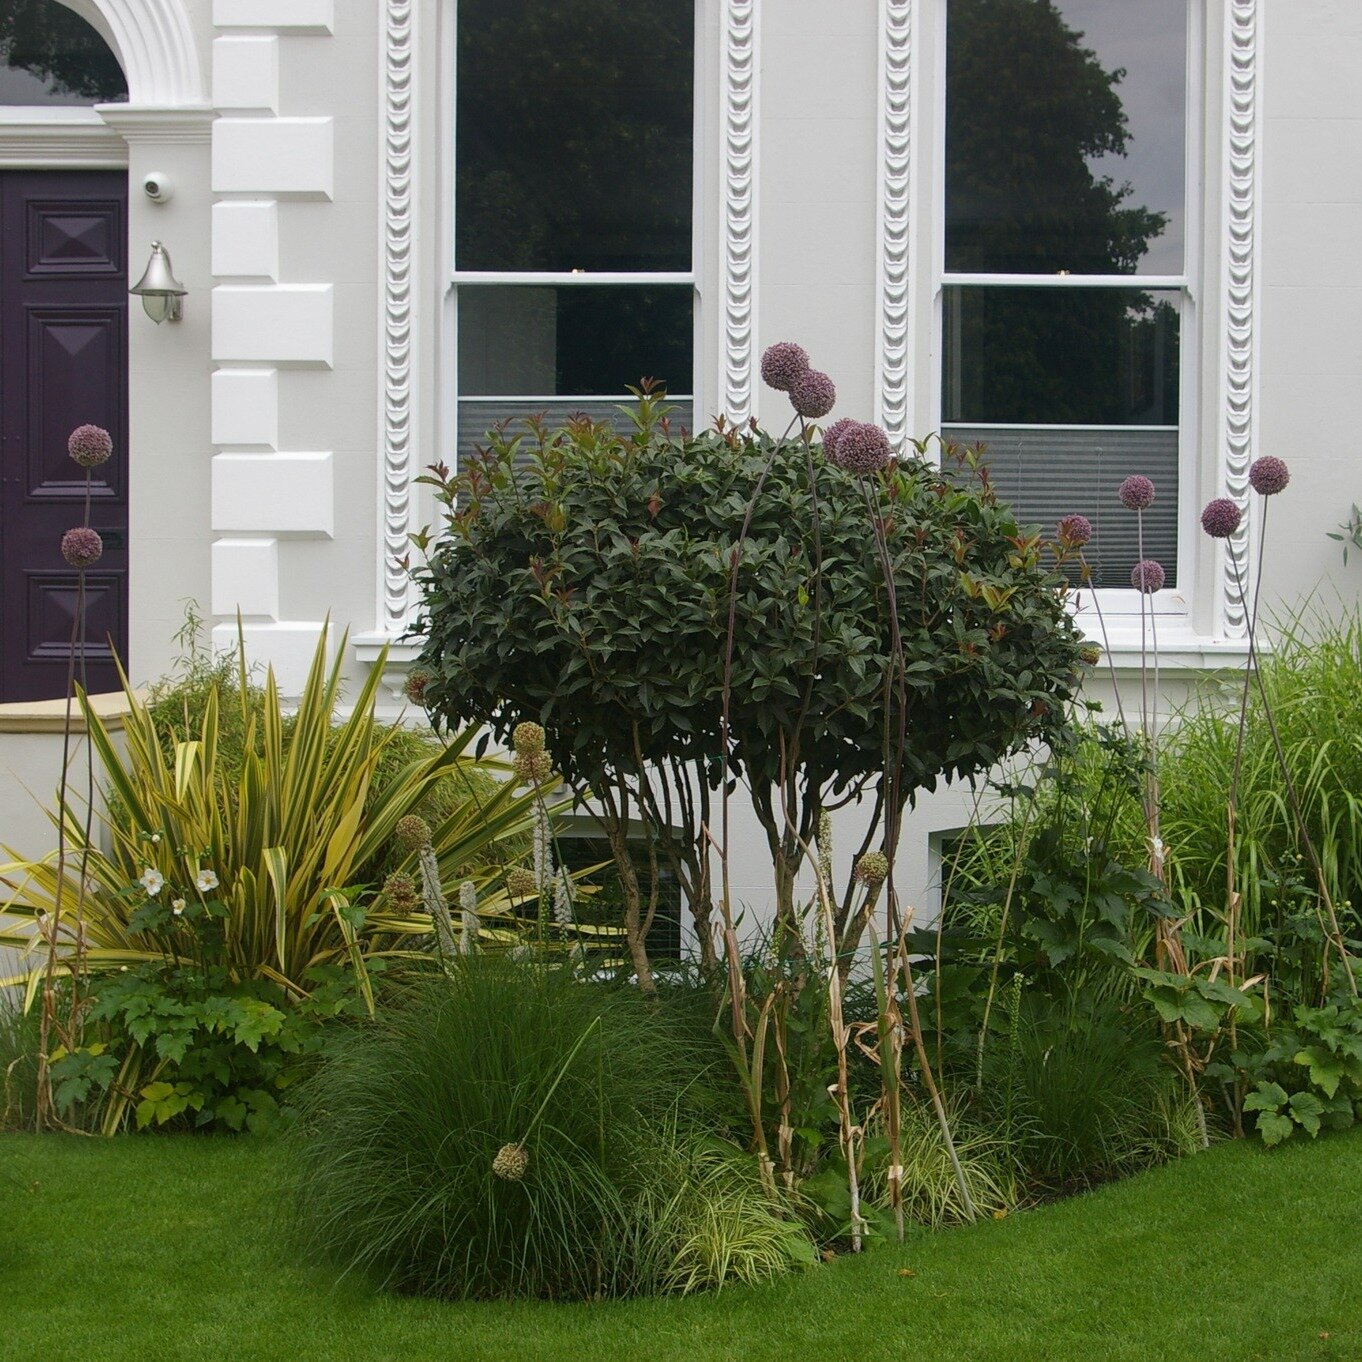 Based in Cheltenham, we&rsquo;re privileged to work on some beautiful Georgian houses in the town and surrounding area. With this design we wanted to deliver an elegant yet bold planting scheme to complement the imposing architecture of the house.
Sw